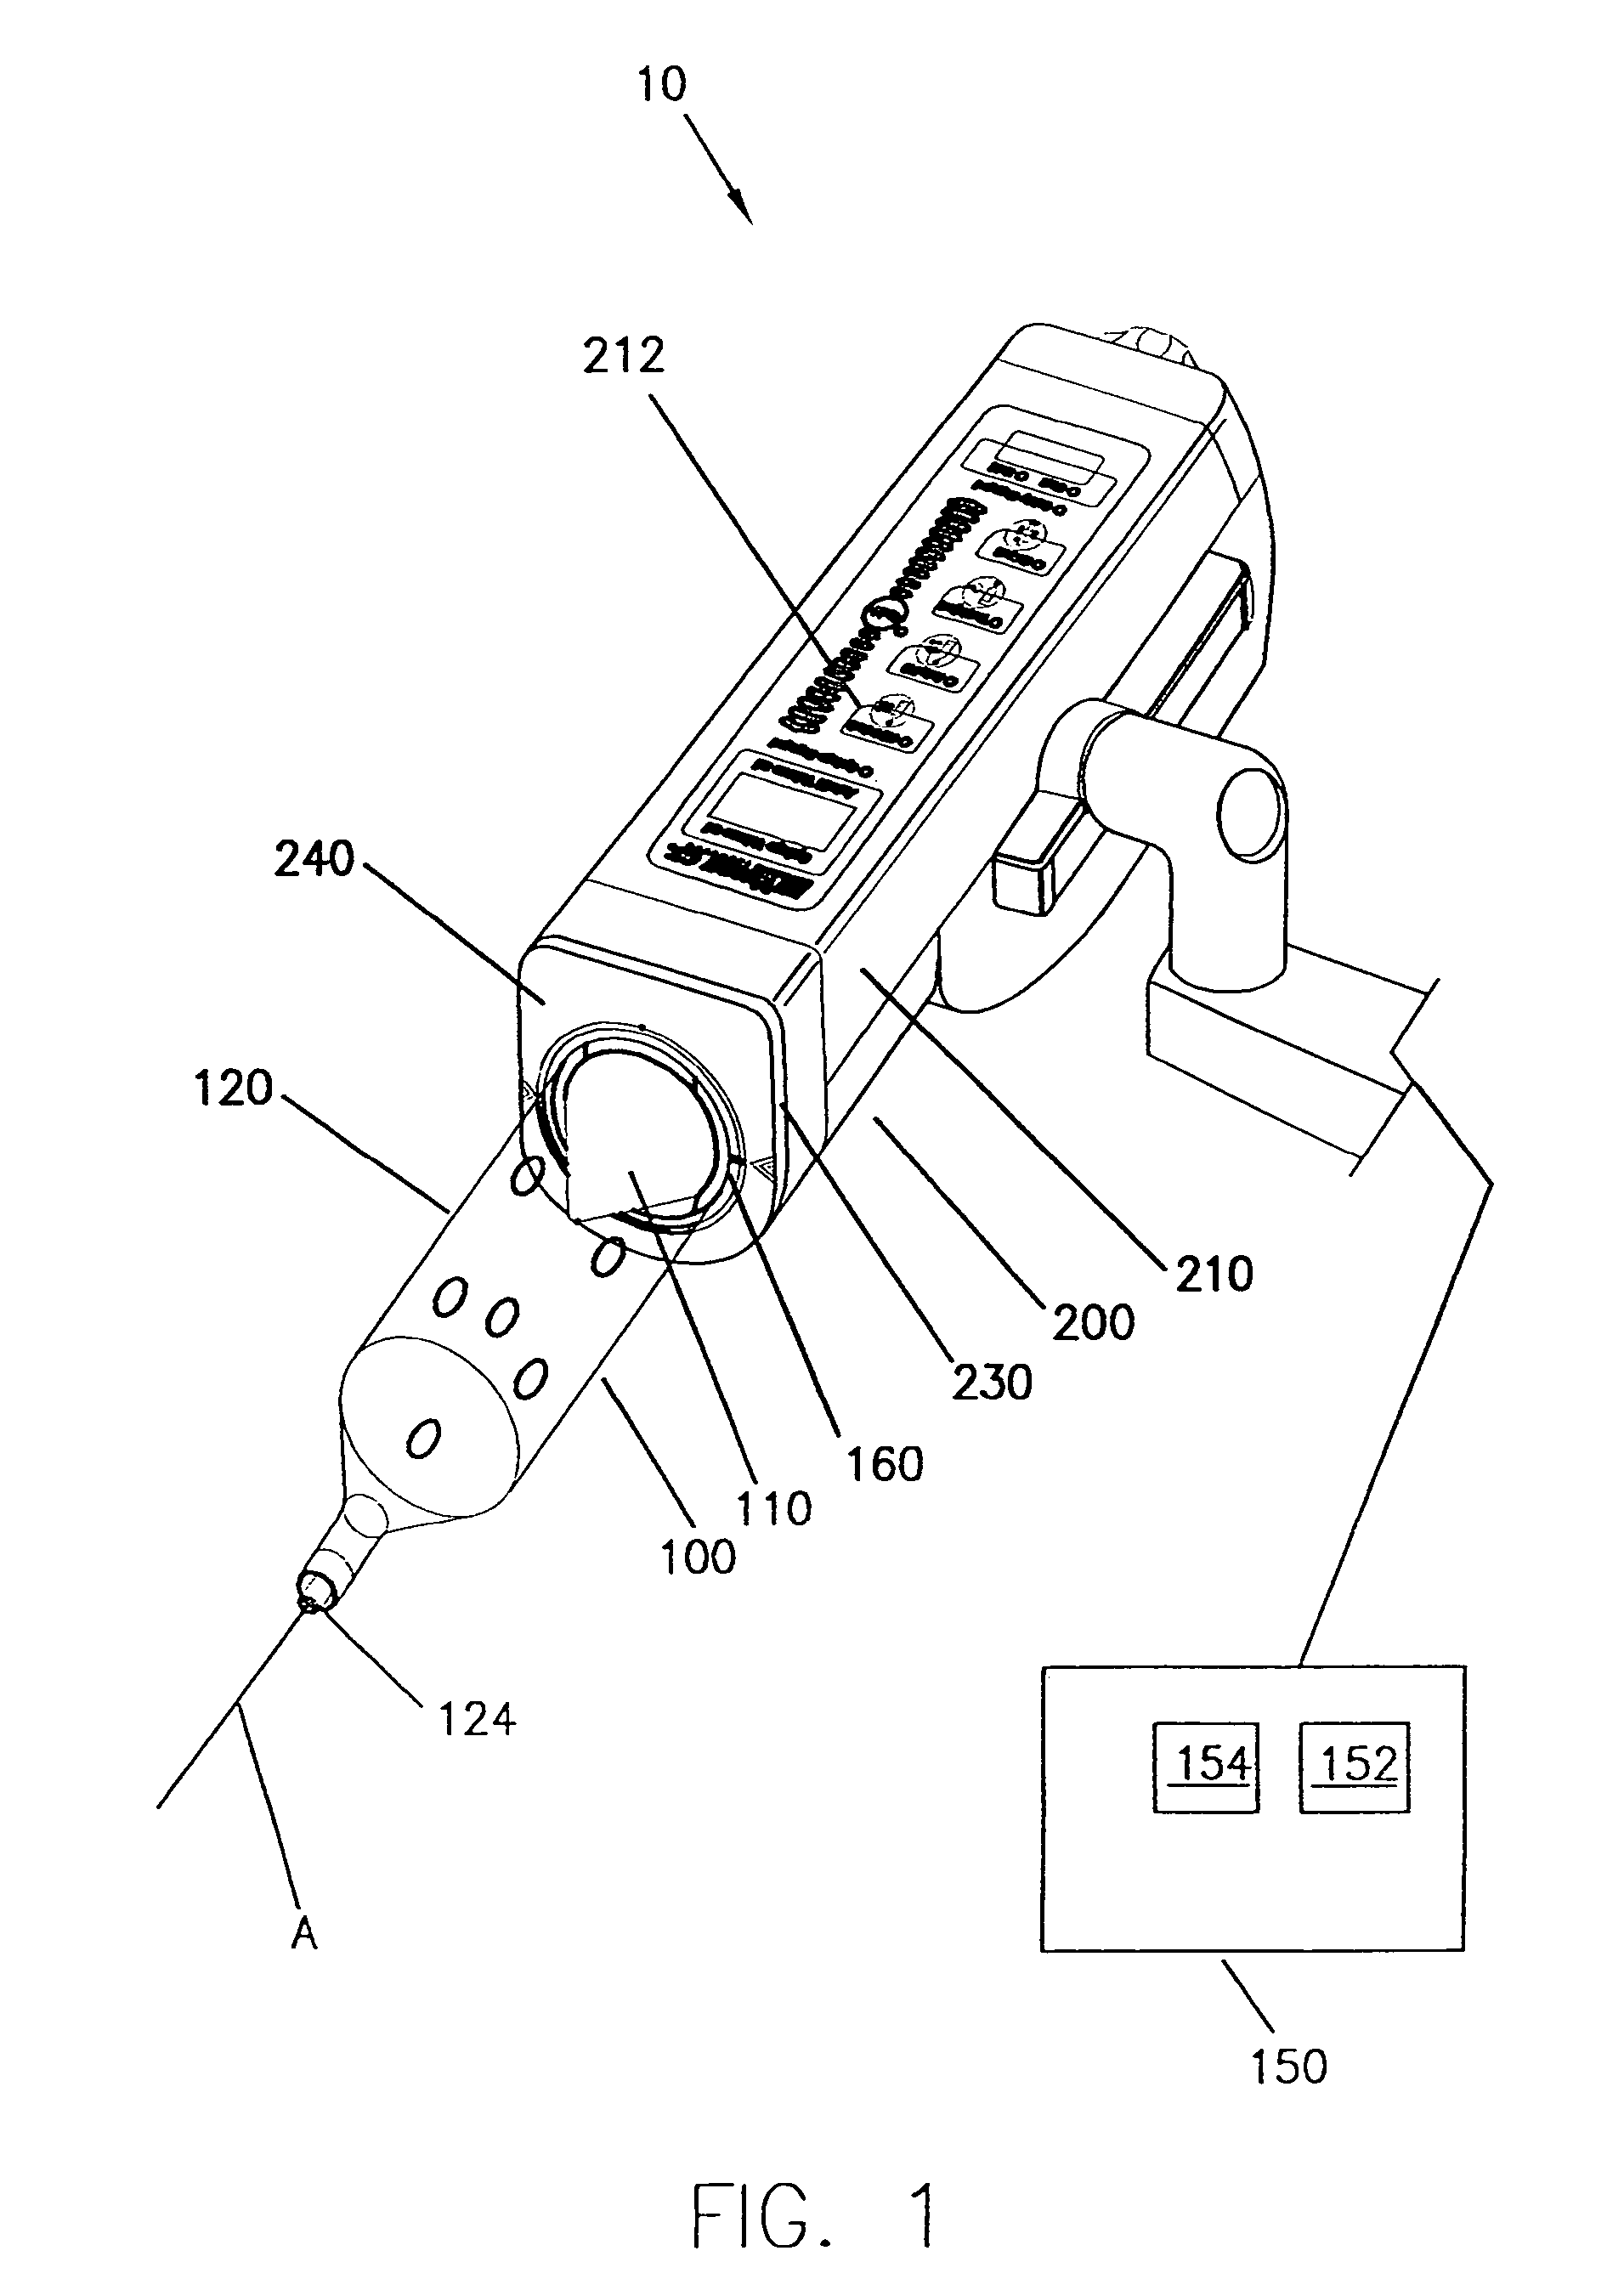 Injector providing drive member advancement and engagement with syringe plunger, and method of connecting a syringe to an injector